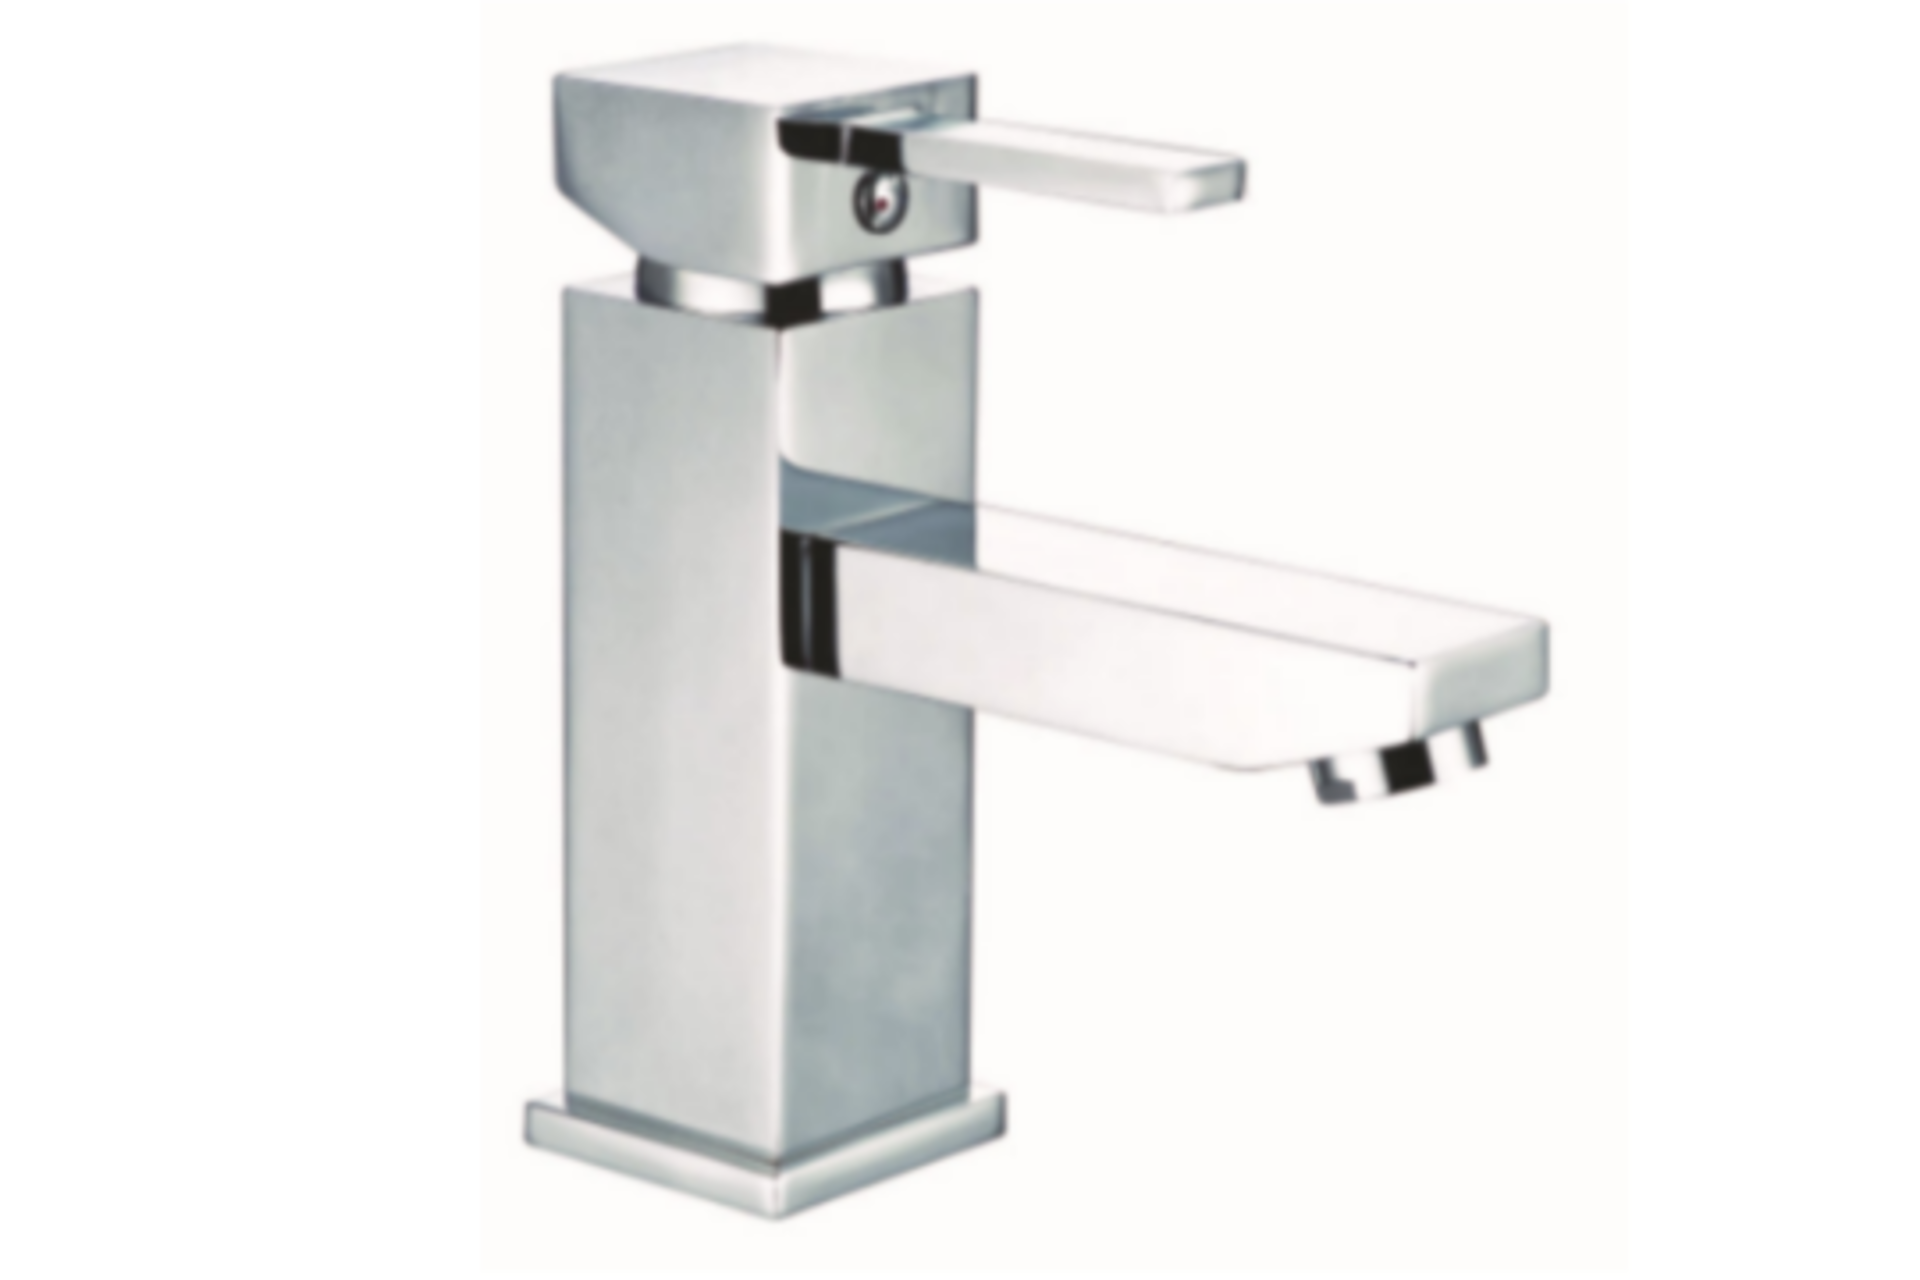 12 x NEW BOXED Abode Lamona CONTEMPORARY CHROME BATH TAPS. RRP £129.99 EACH, GIVING THIS LOT A TOTAL